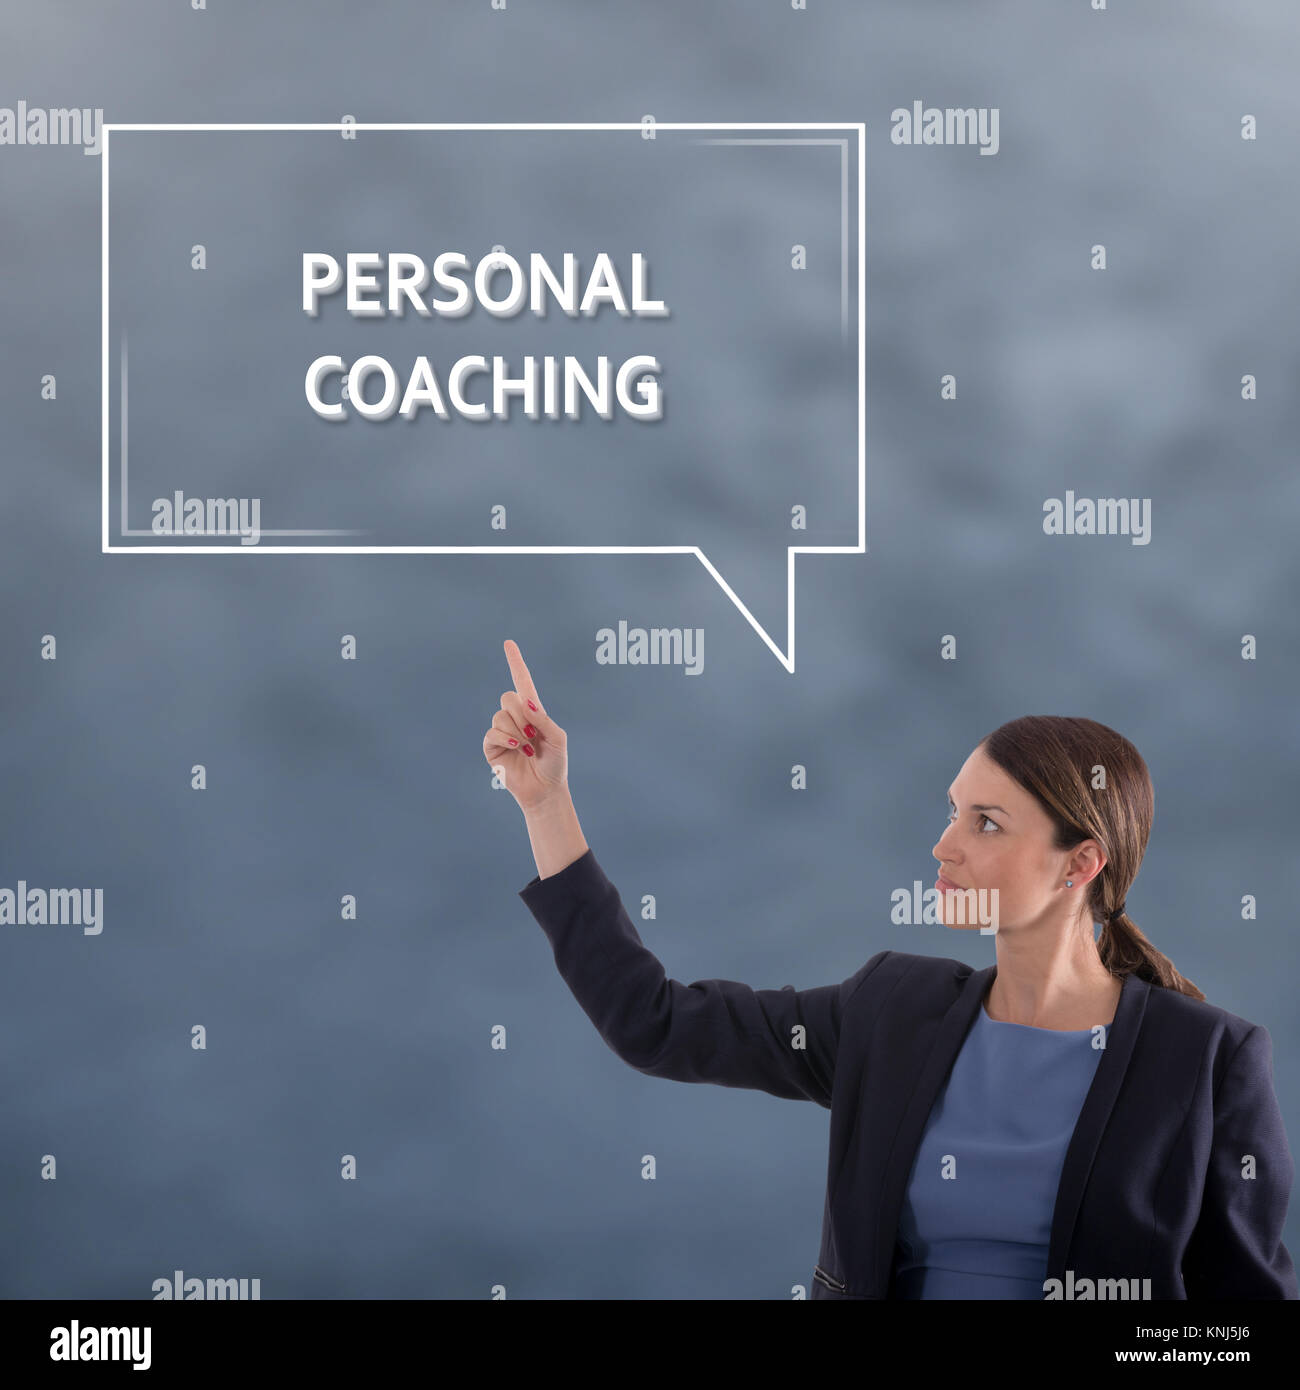 PERSONAL COACHING Business Concept. Business Woman Graphic Concept Stock Photo